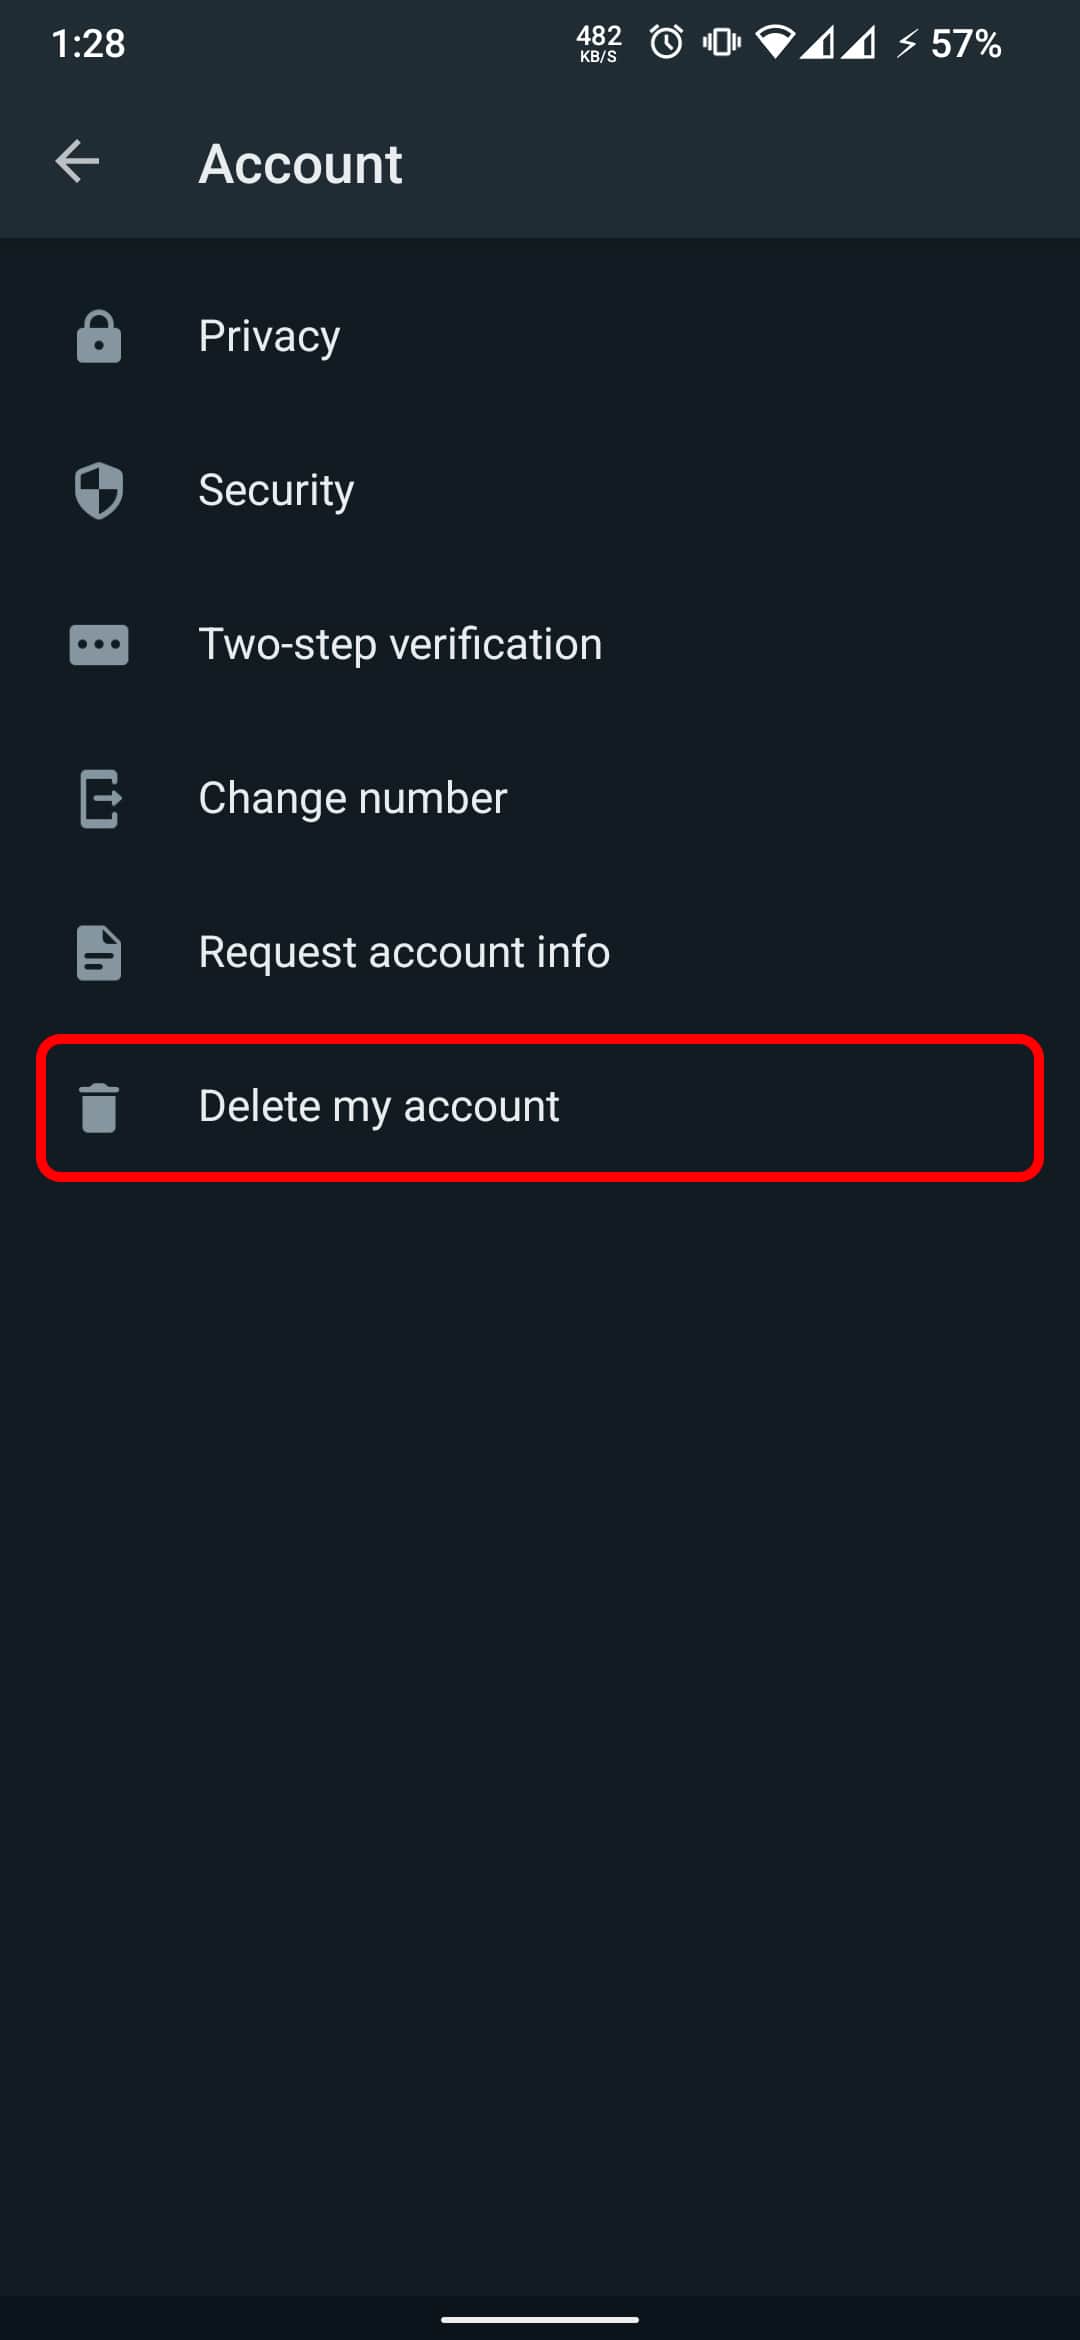 The fourth step is to delete the WhatsApp account on Android